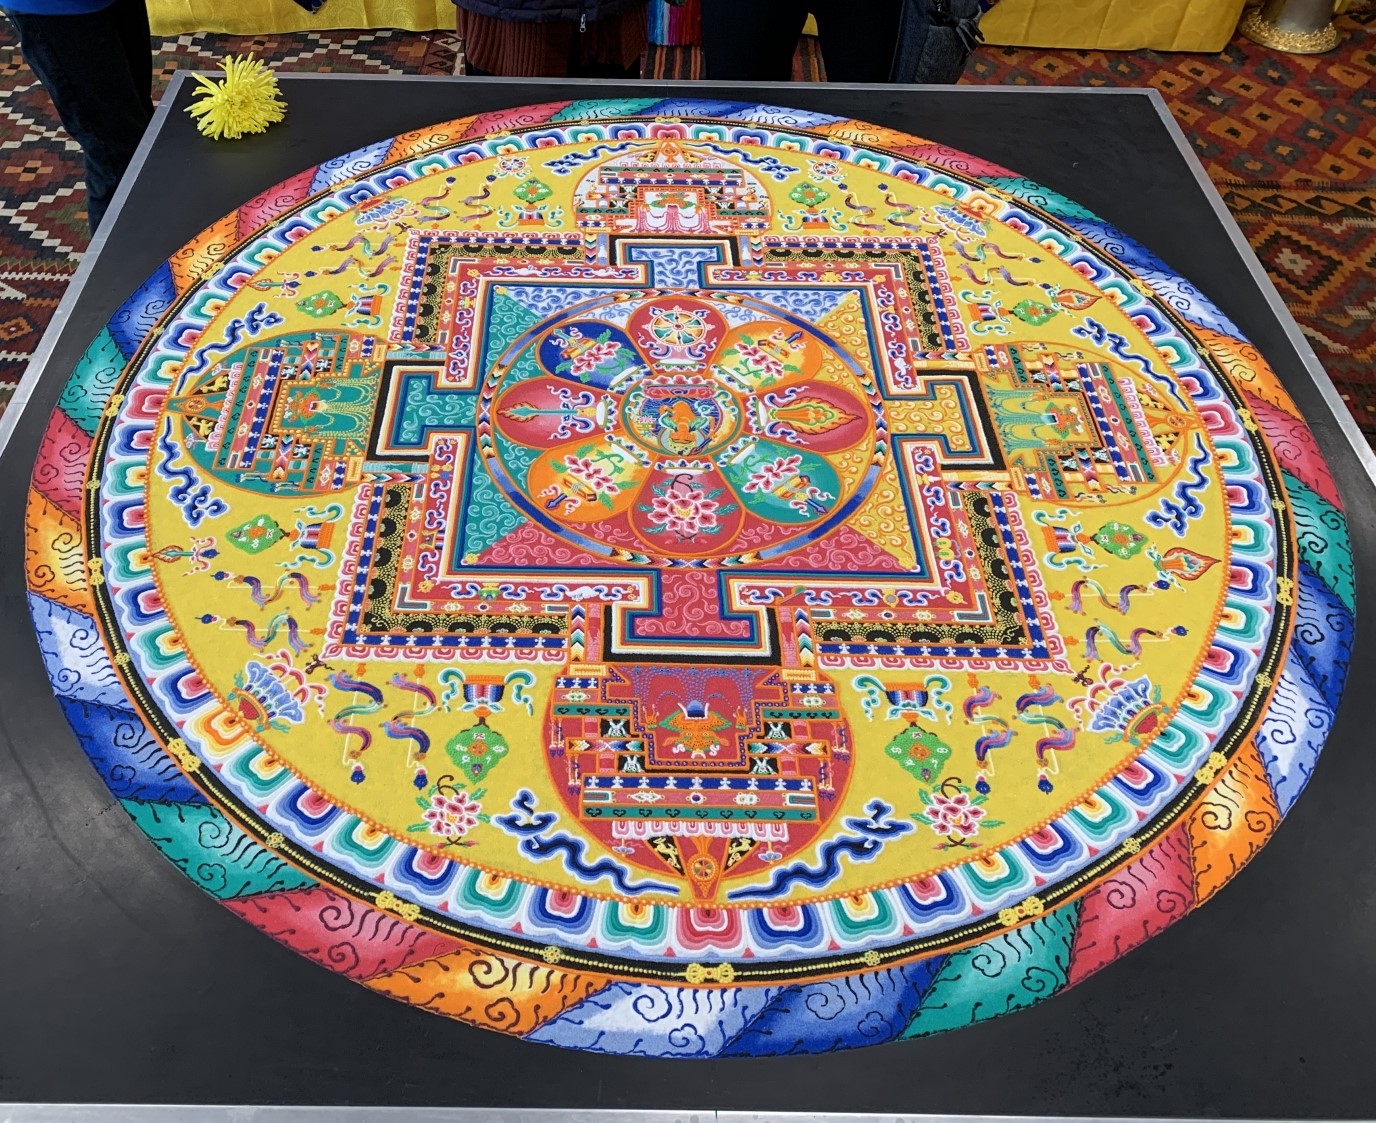 The Wisdom Buddha Mandala is one of the choices that the public can vote for the Tibetan monks to create at Florida CraftArt in St. Petersburg on Jan. 8-14, 2024.